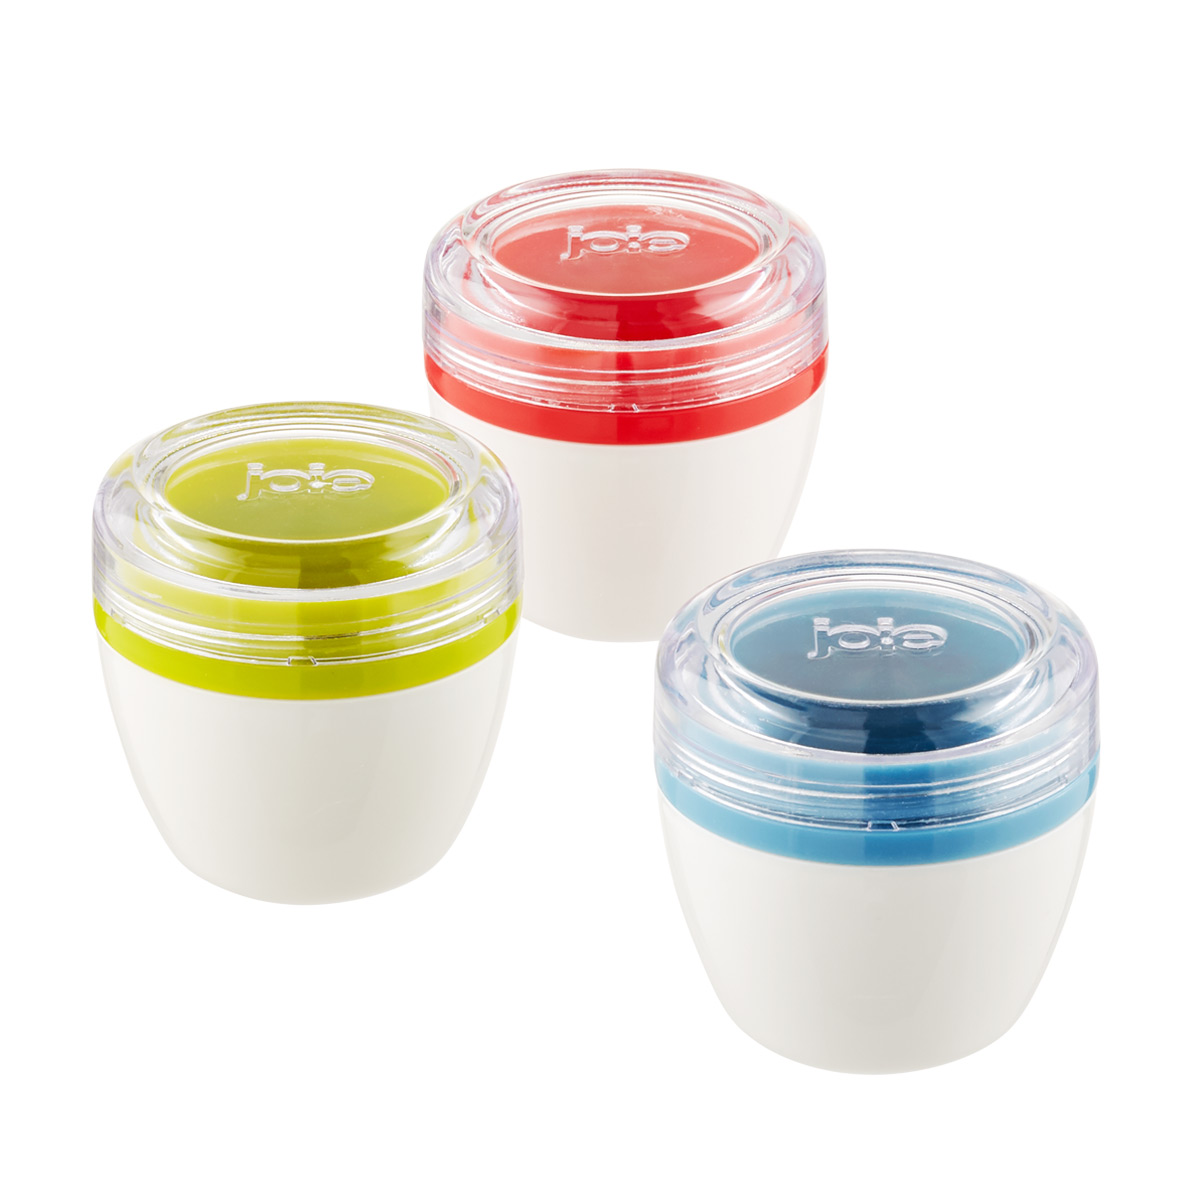 https://www.containerstore.com/catalogimages/346810/10075670-condiments-to-go.jpg